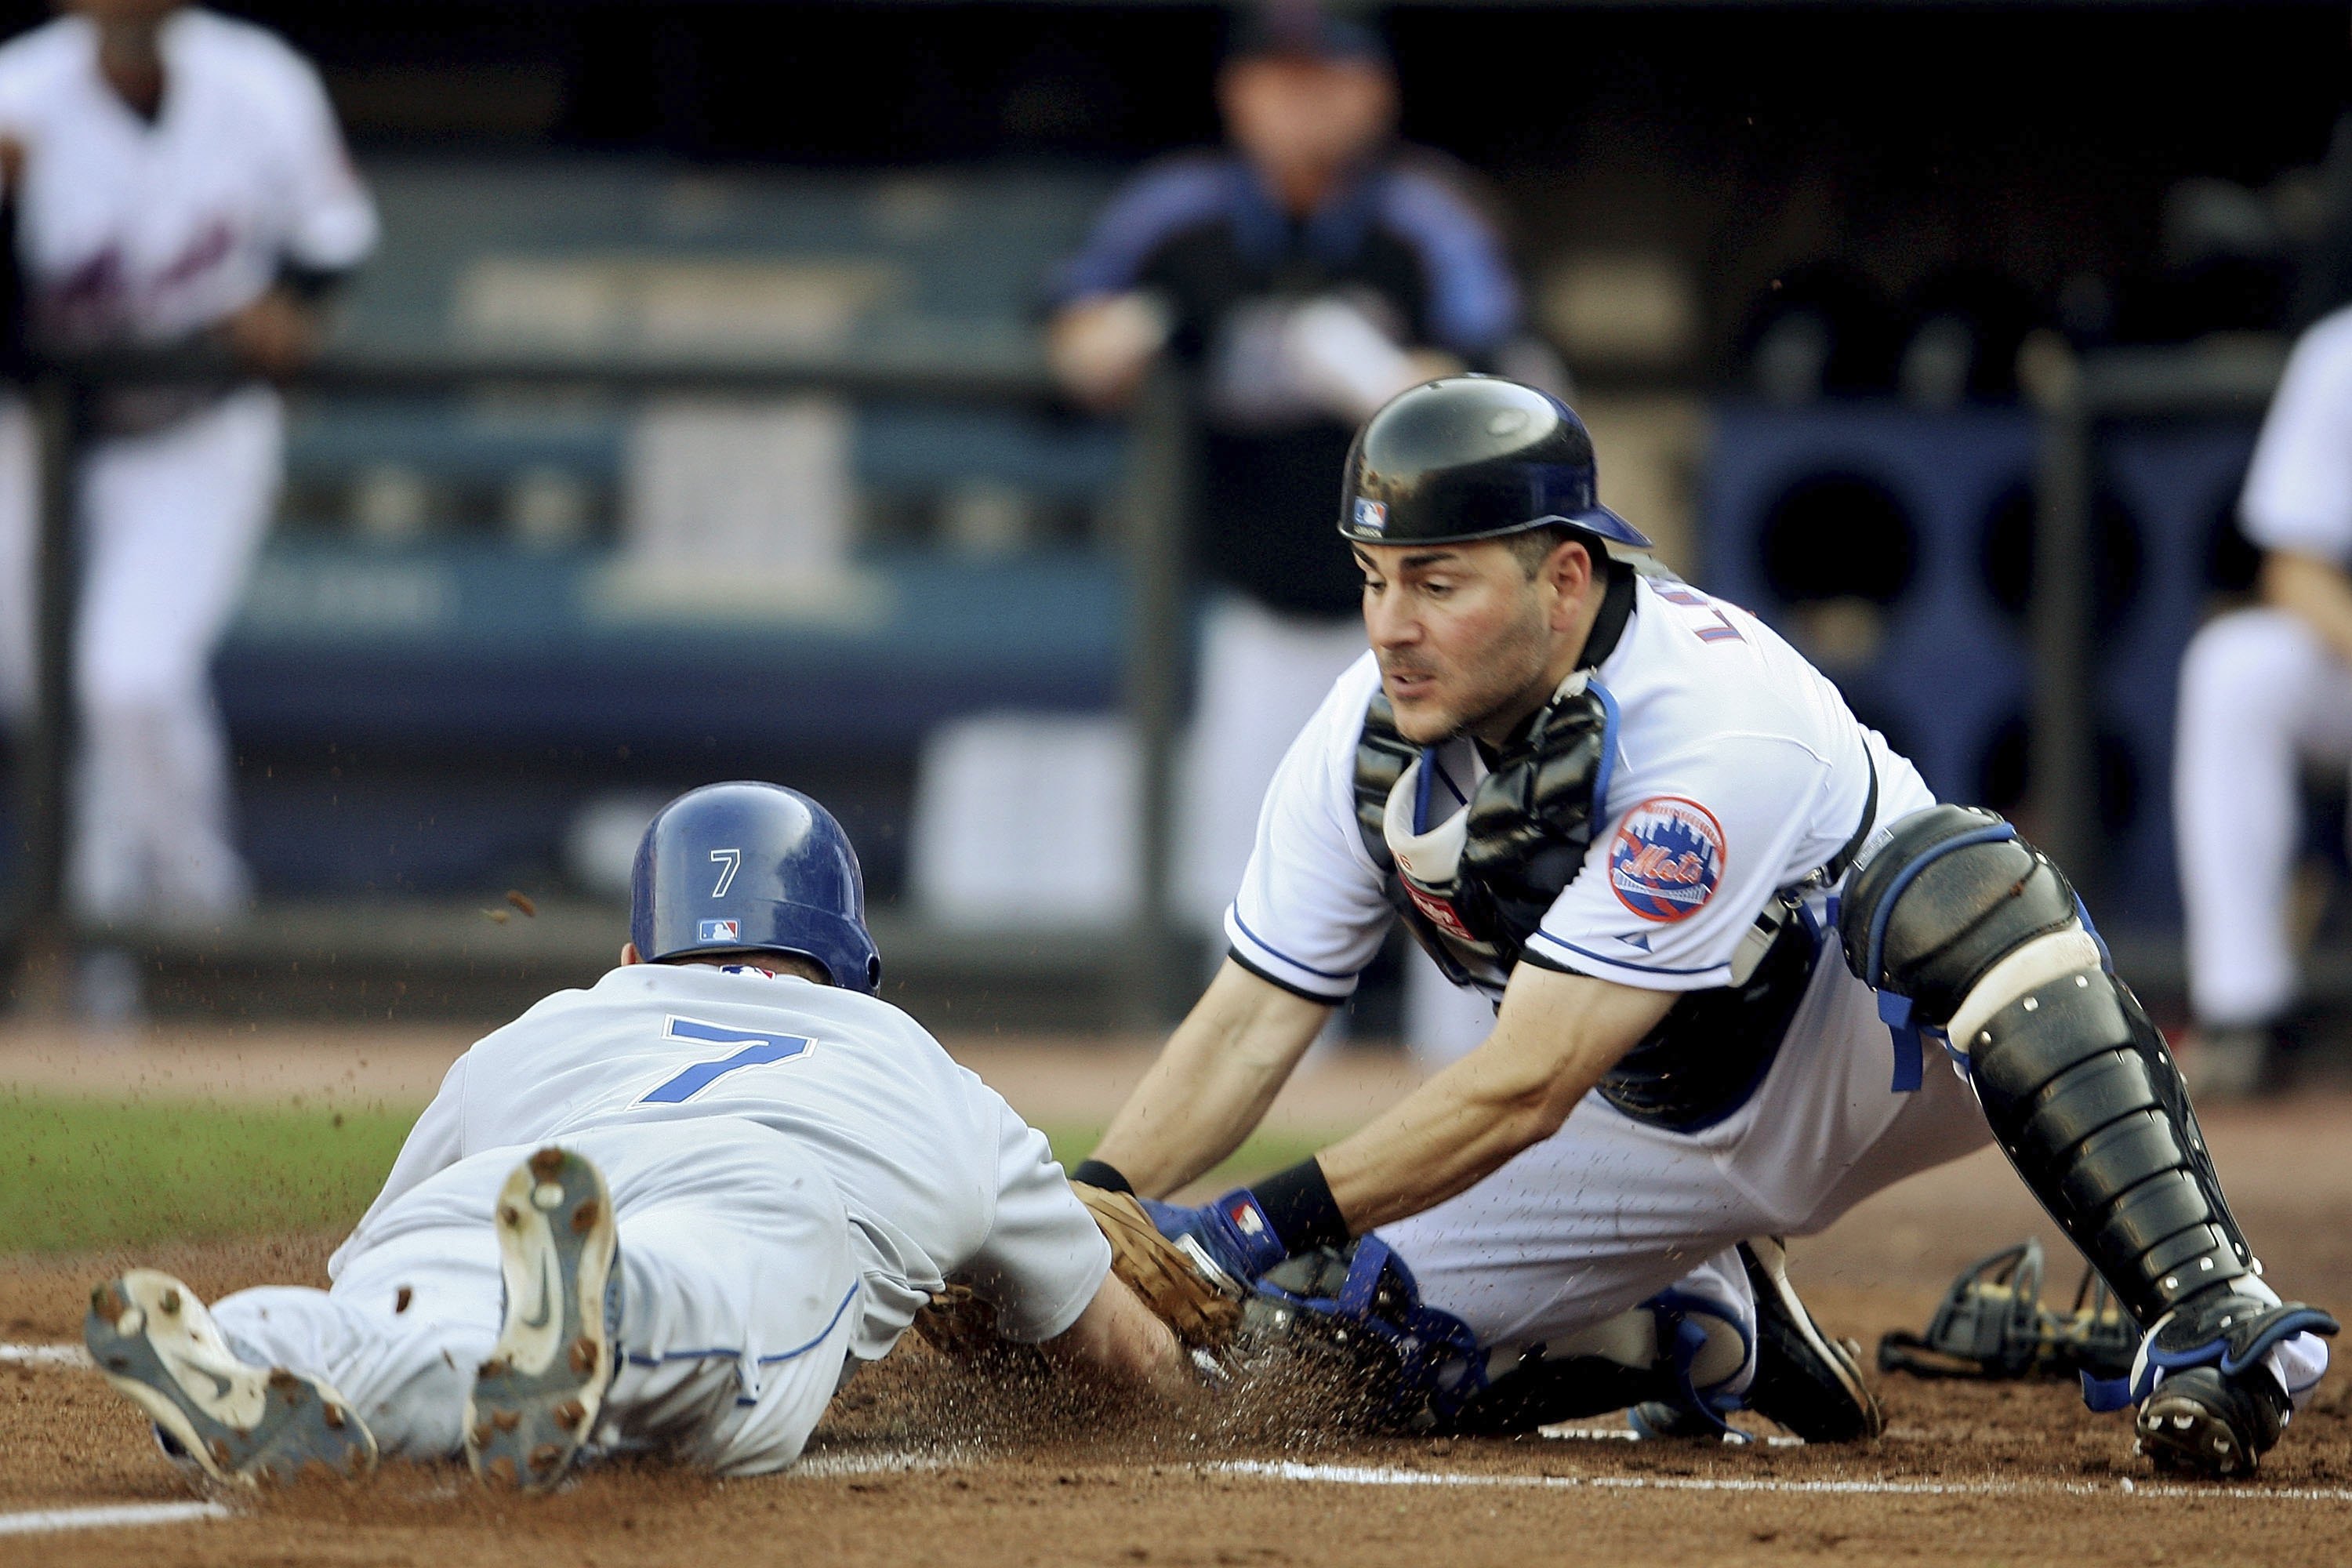 Paul Lo Duca tags J.D. Drew for the second out of a bizarre double play.